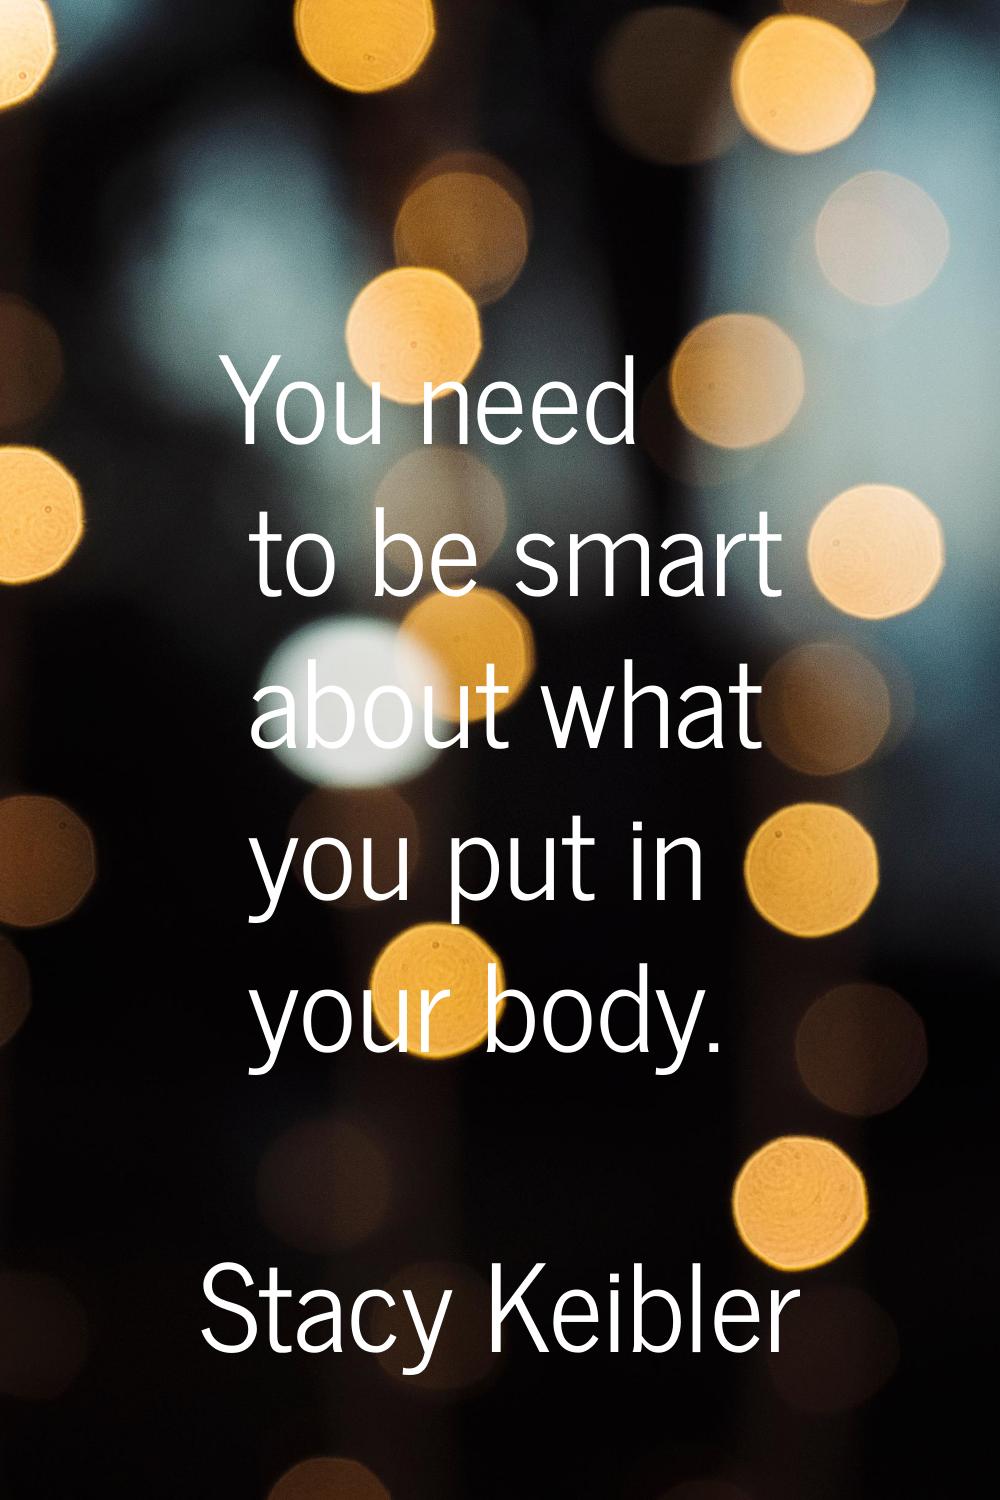 You need to be smart about what you put in your body.